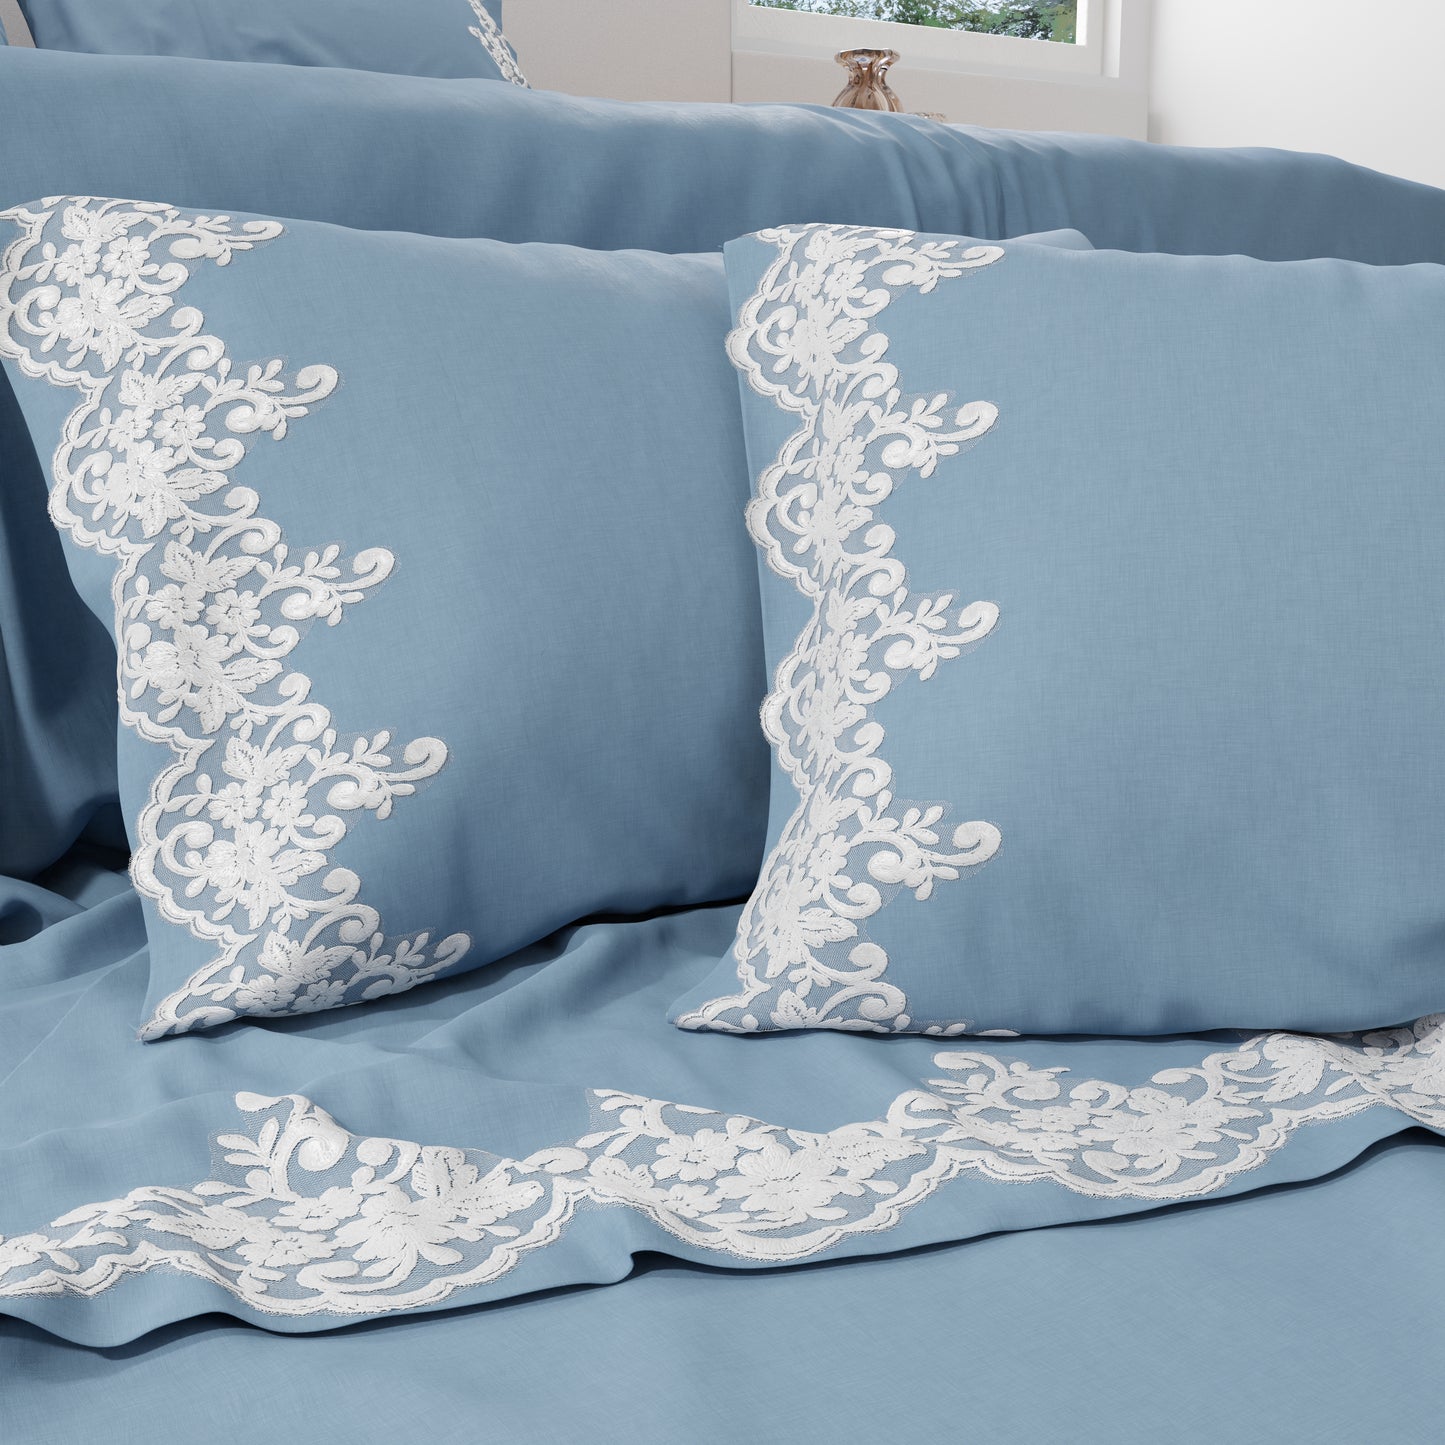 Percale Sheets with Lace, Light Blue Cotton Double Sheets